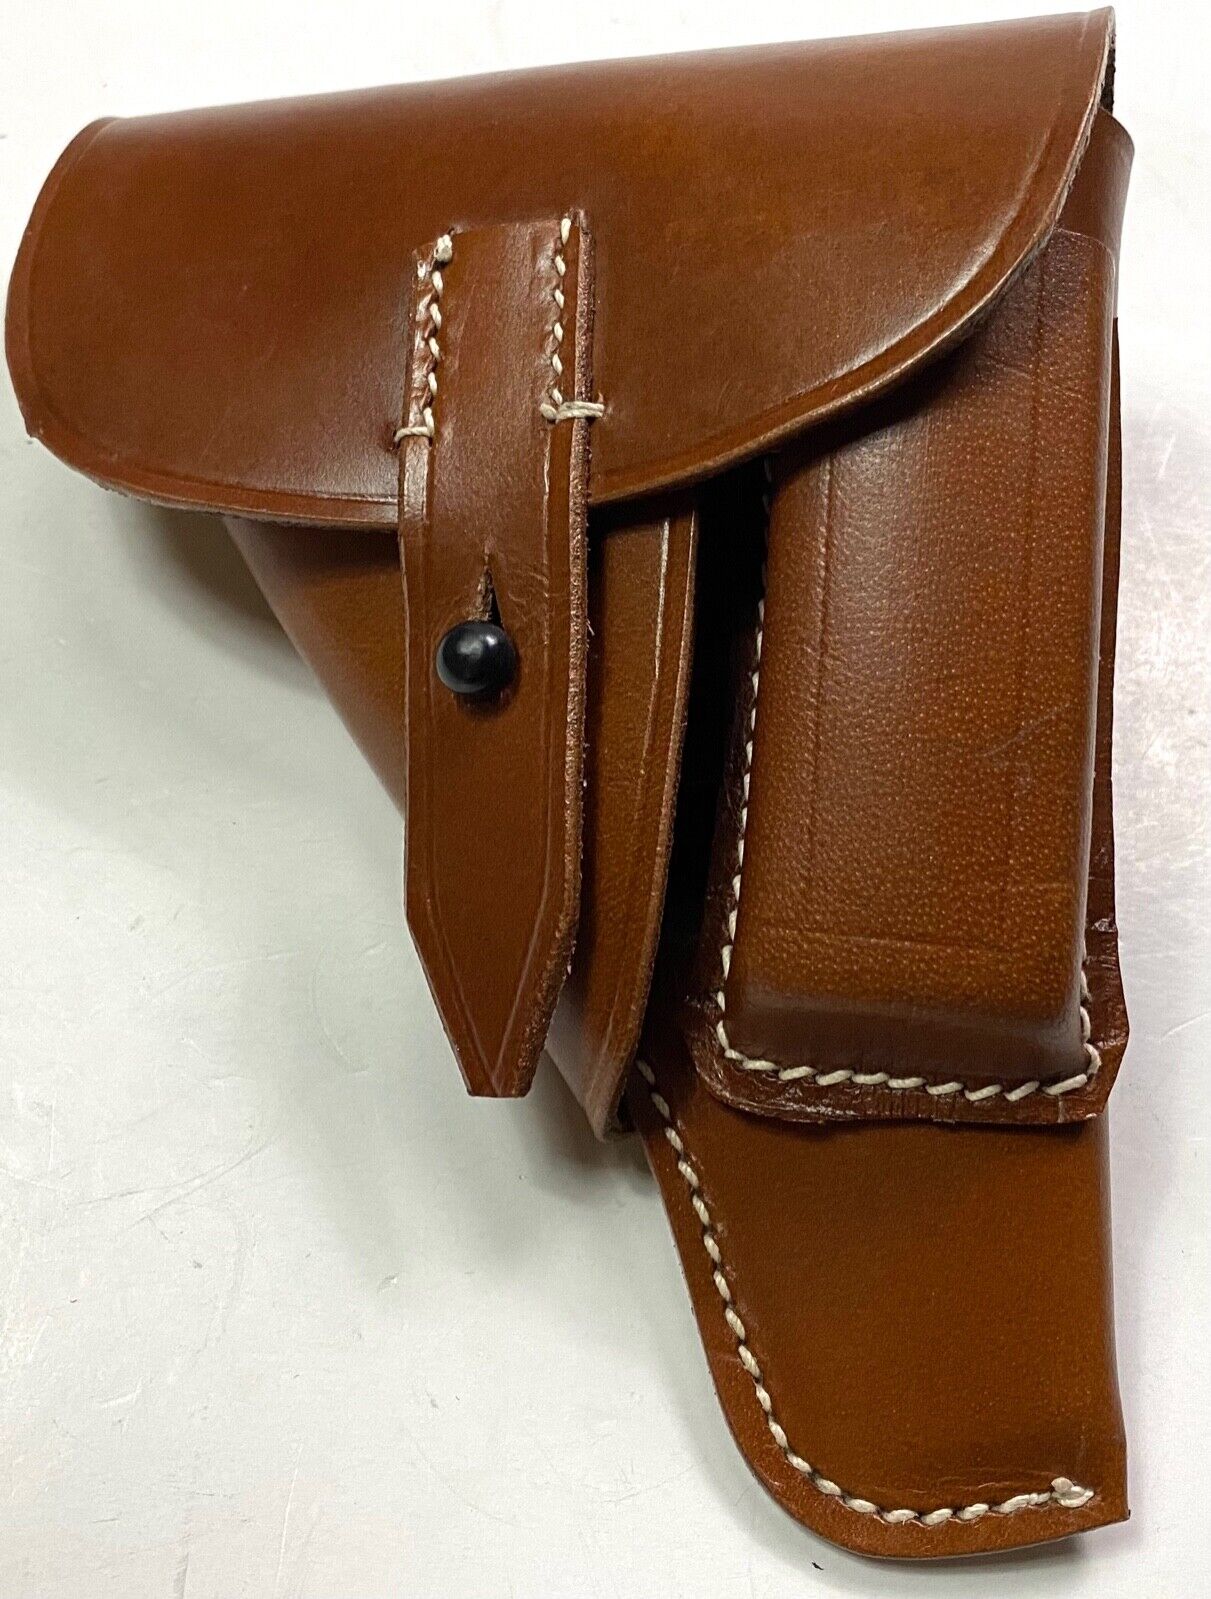  WWII GERMAN 9MM PPK LEATHER PISTOL HOLSTER-BROWN LEATHER